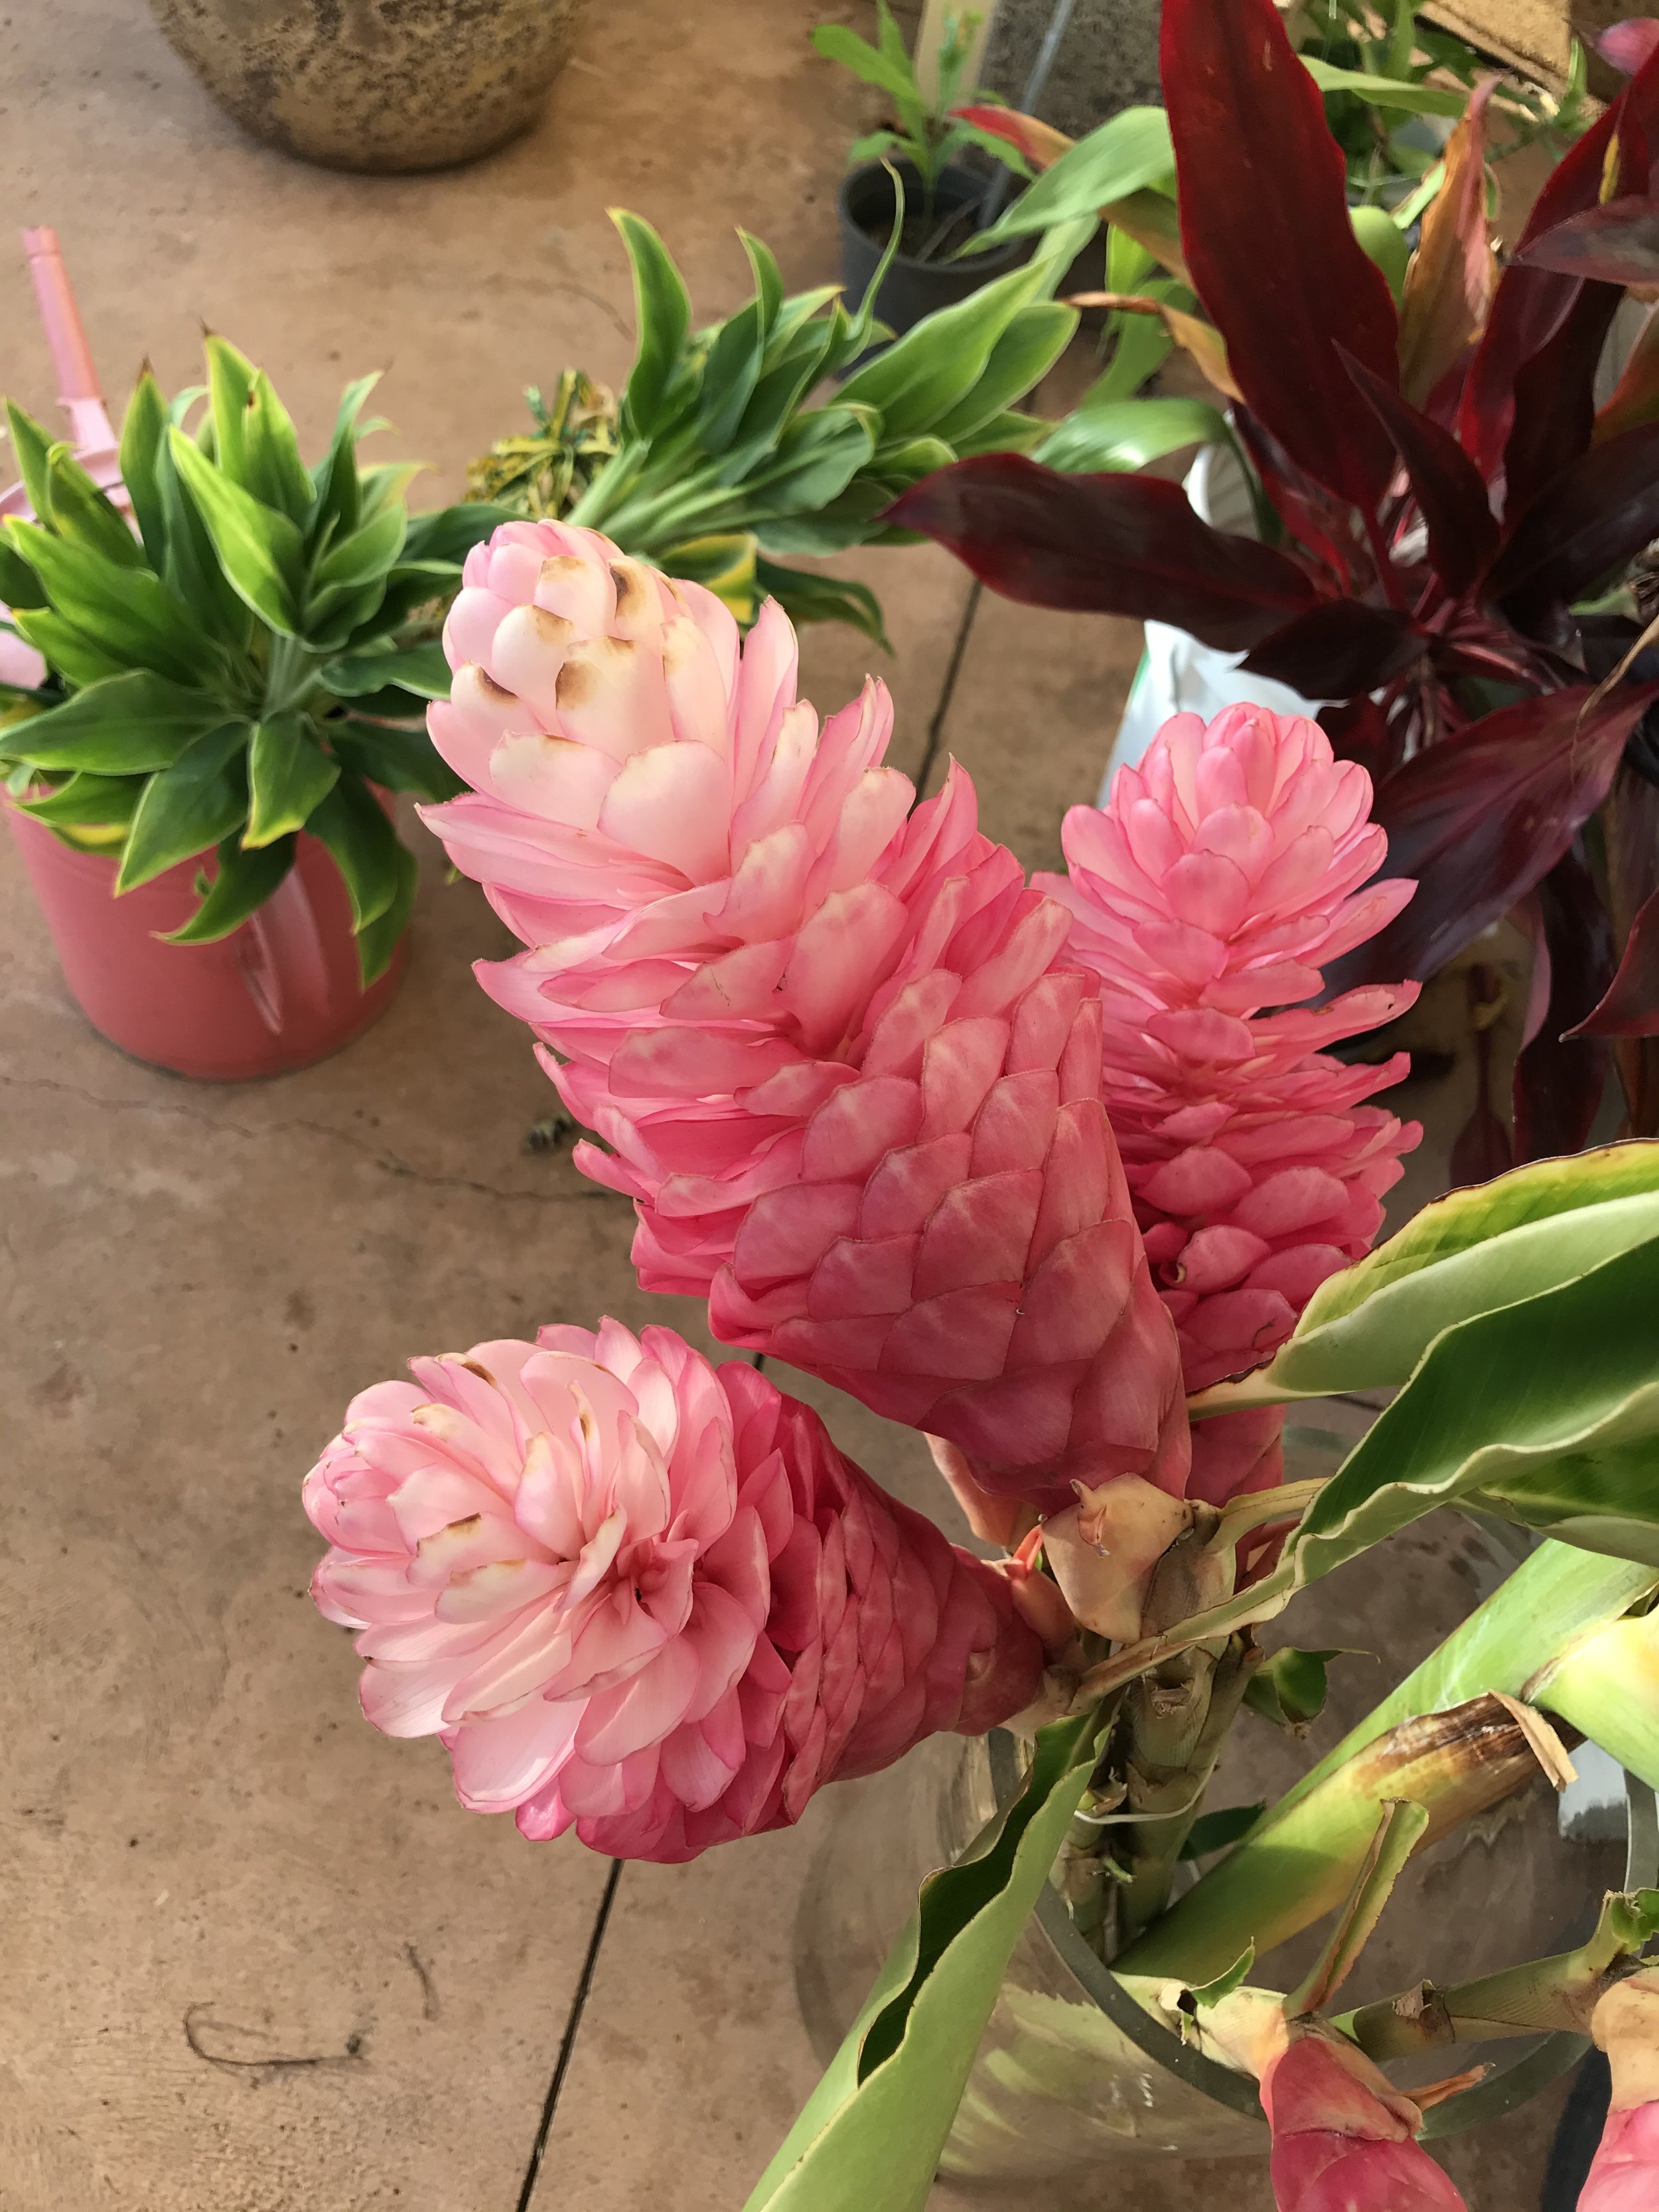 Hundreds of colorful plant varieties will be for sale at the Maui Group Mother’s Day Plant and Yard Sale on May 11. Photo: Lucienne de Naie